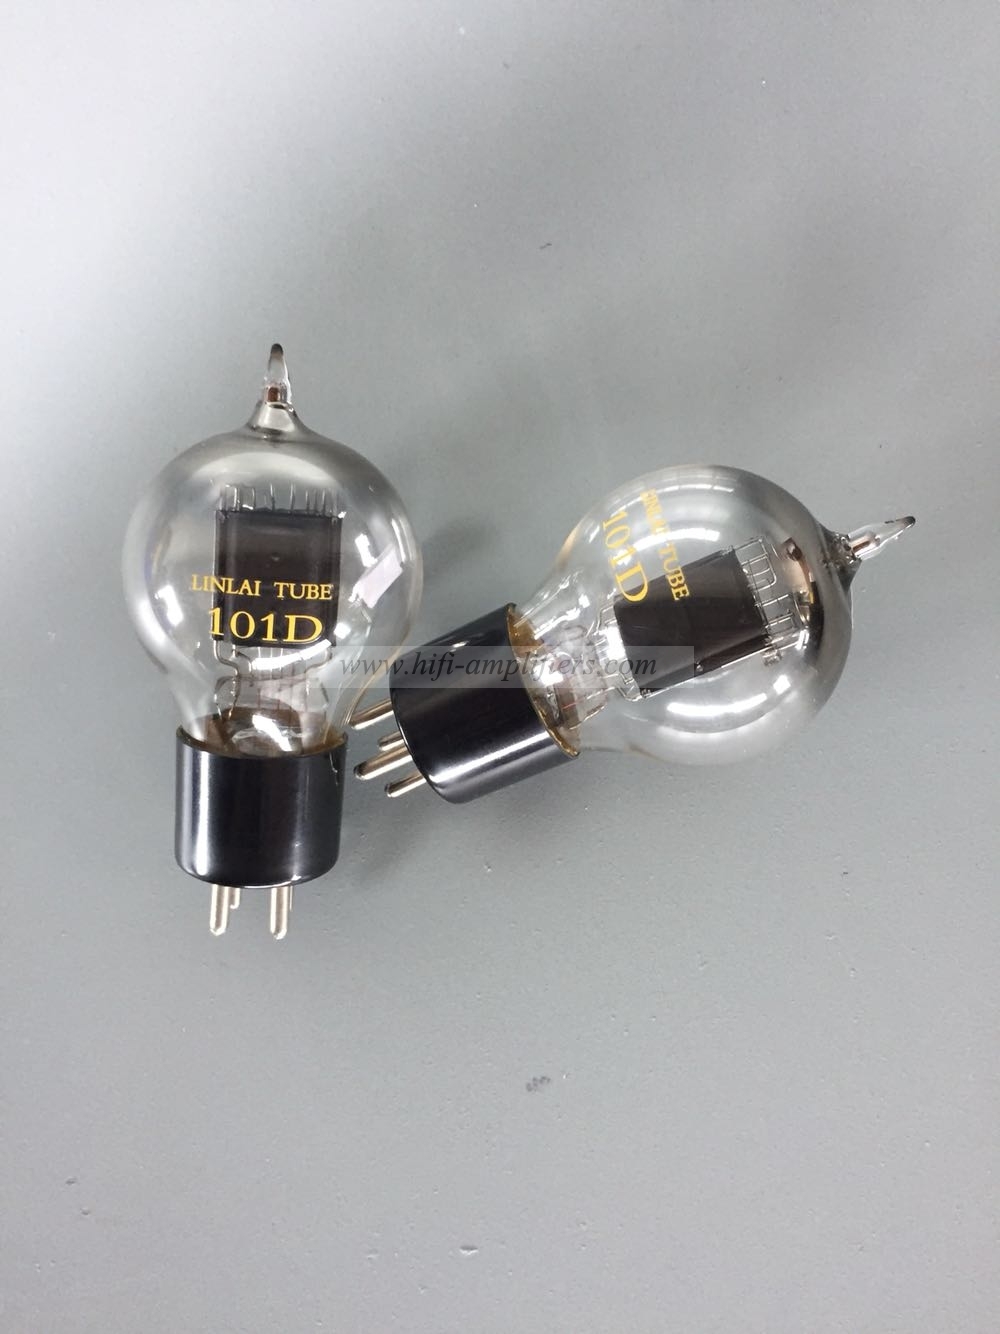 LINLAITUBE 101D Vacuum Tube Hi-end Electronic tube value Factory Matched Pair